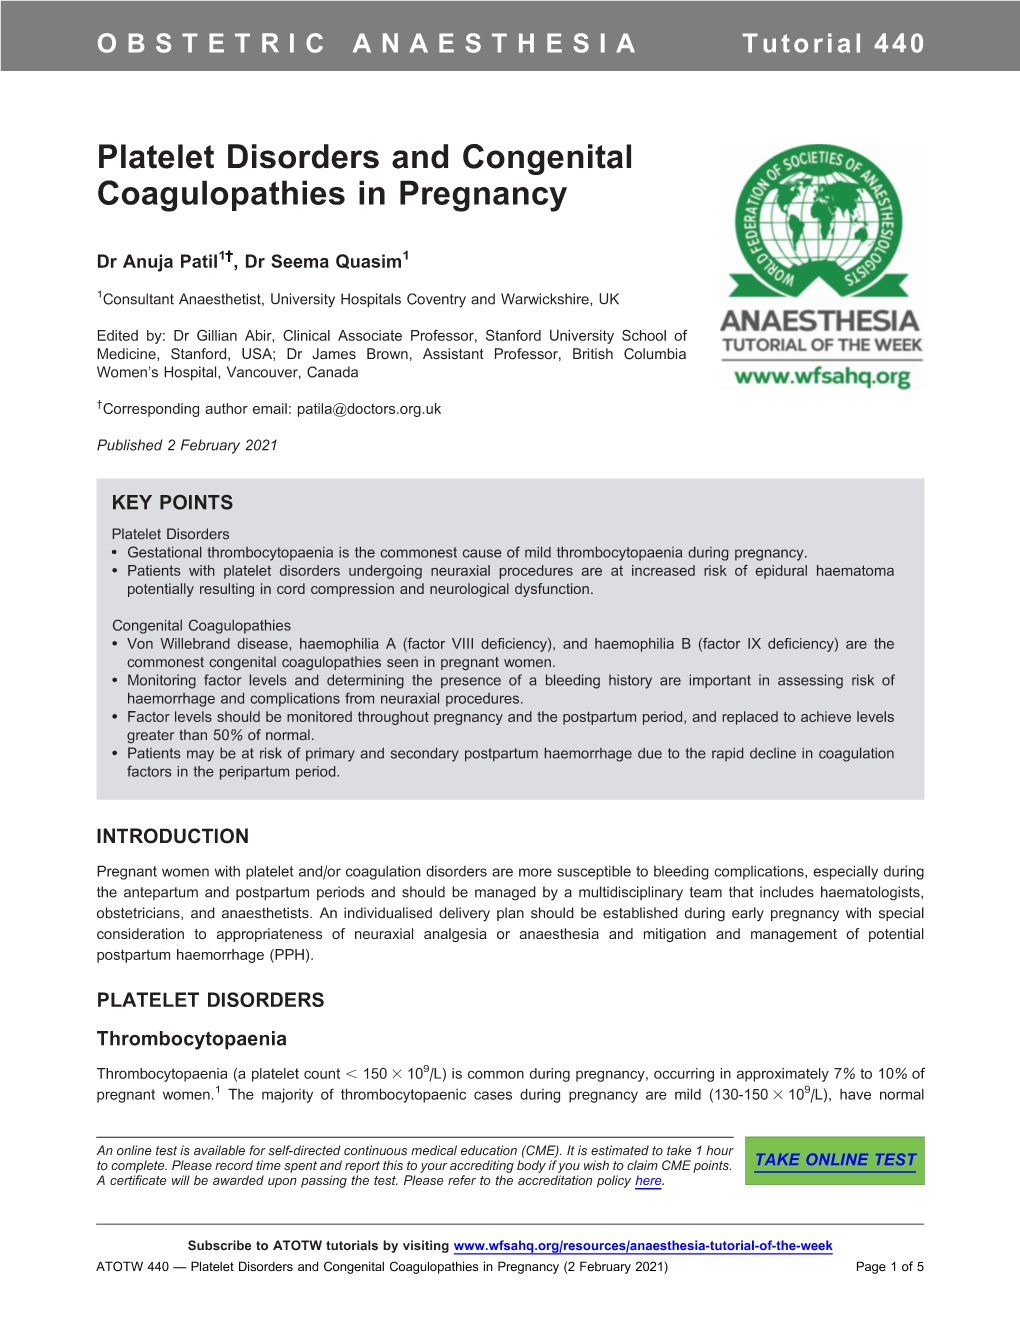 Platelet Disorders and Congenital Coagulopathies in Pregnancy